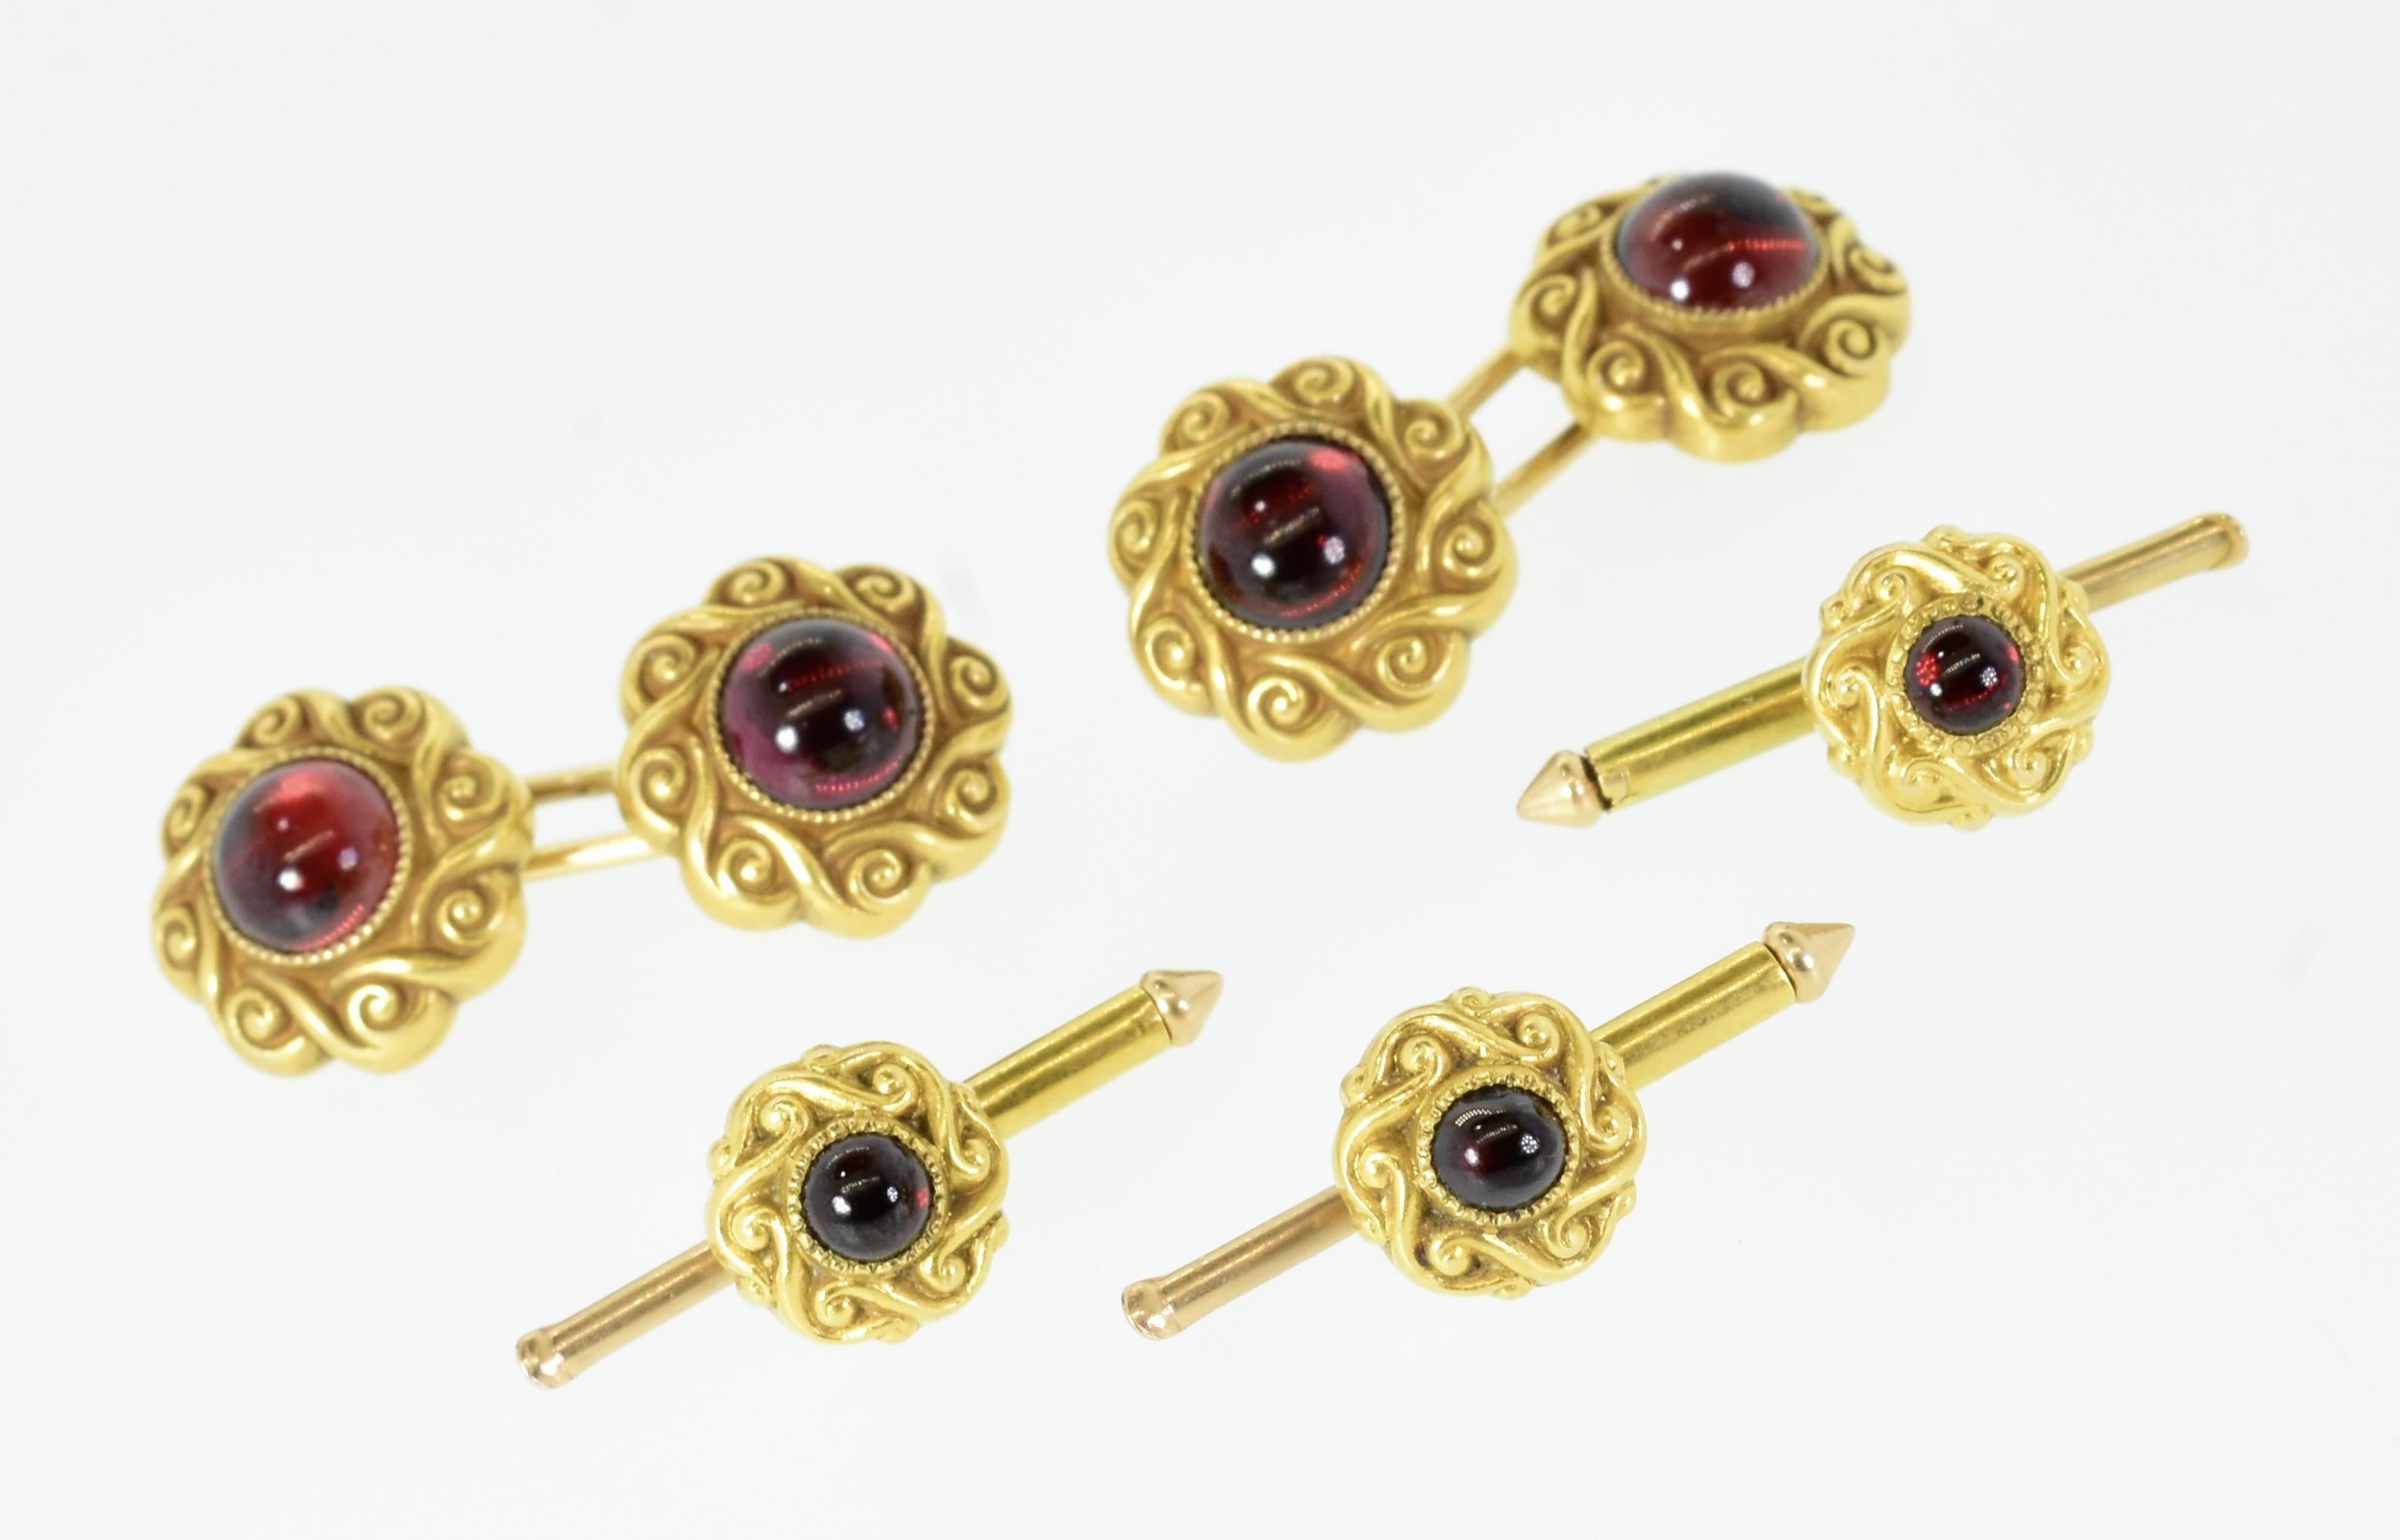 Victorian cuff and stud set.  Bright red garnets are cut en cabochon and set within a finely mil-grained bezel. The bright yellow gold rims are hand engraved in a scroll like motif.  The cufflinks measure 12.11 mm. in diameter, the studs measure 8.3